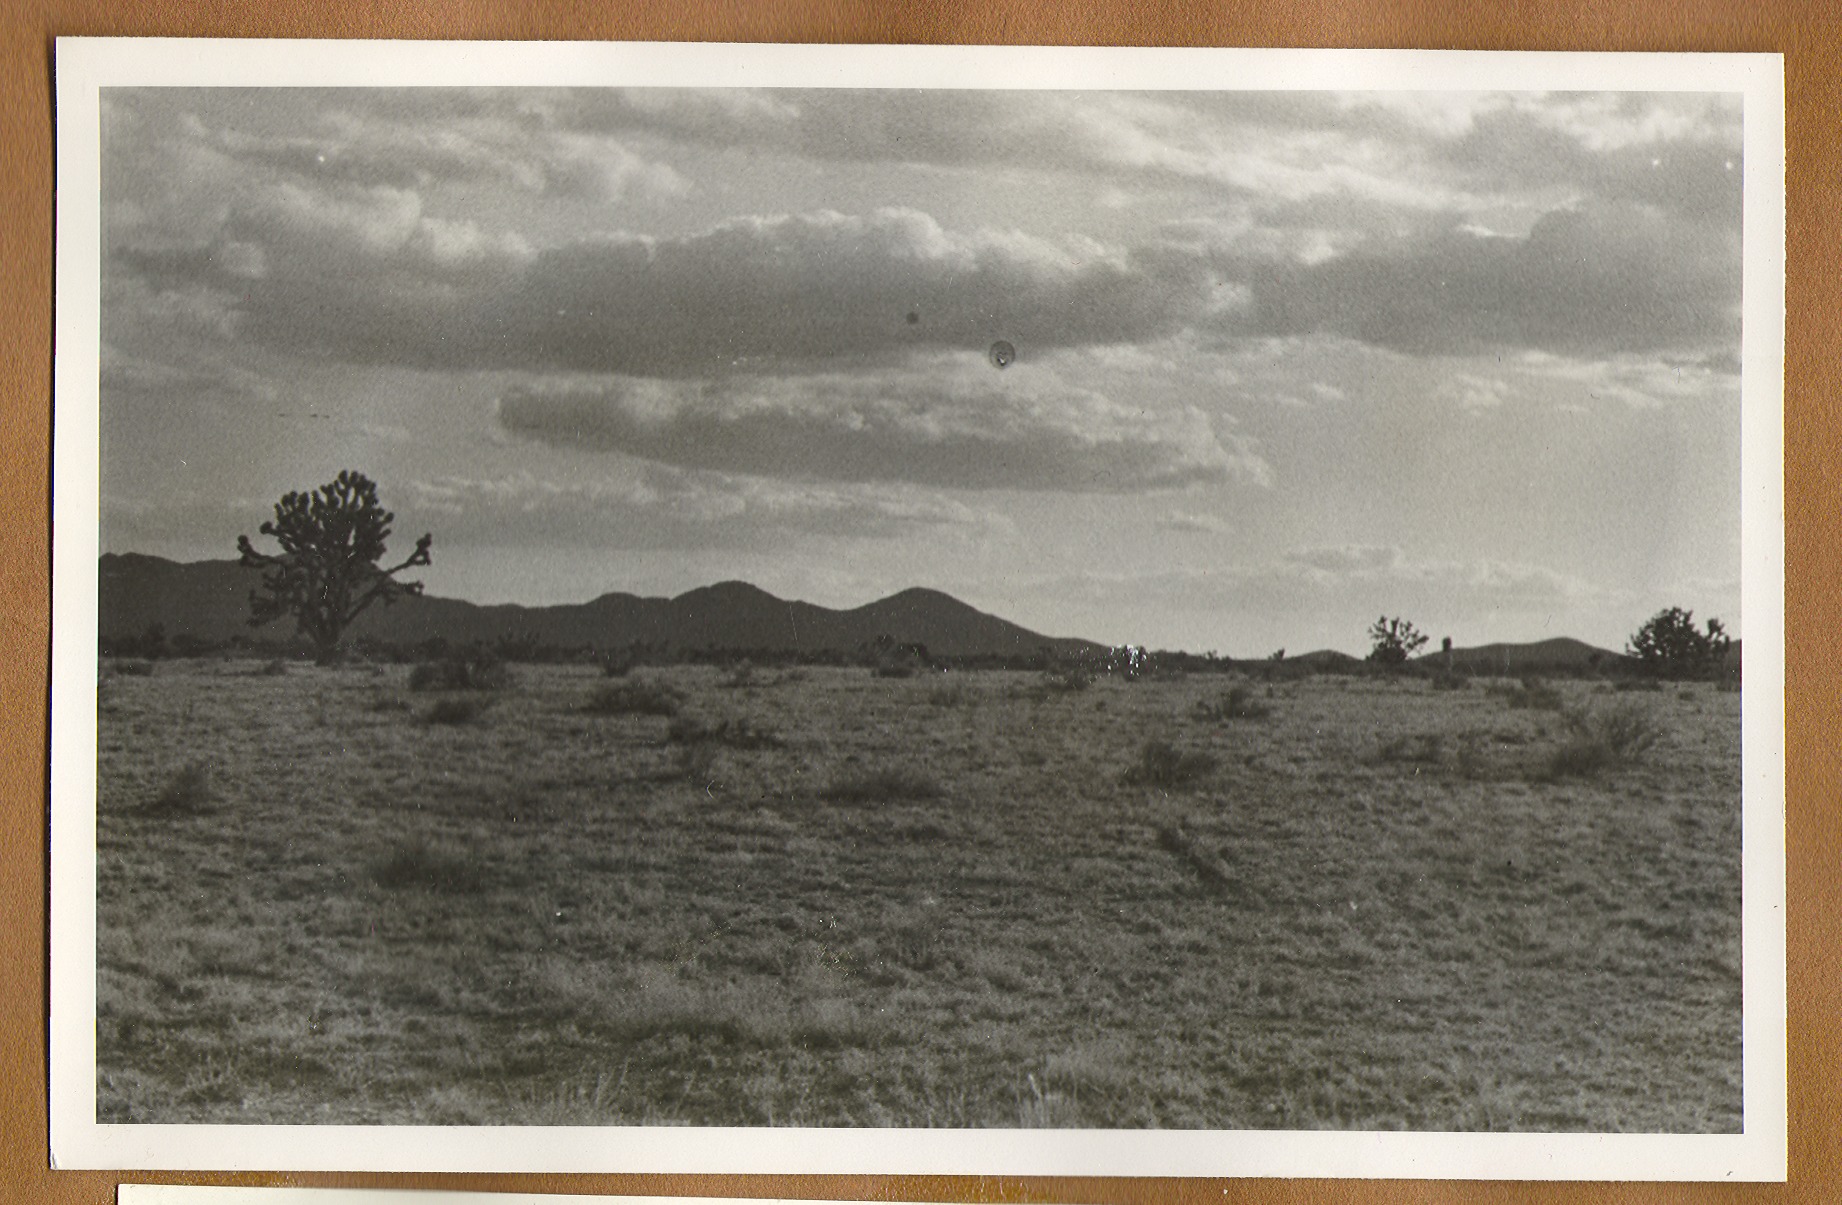 Desert view on the ranch property: photographic print